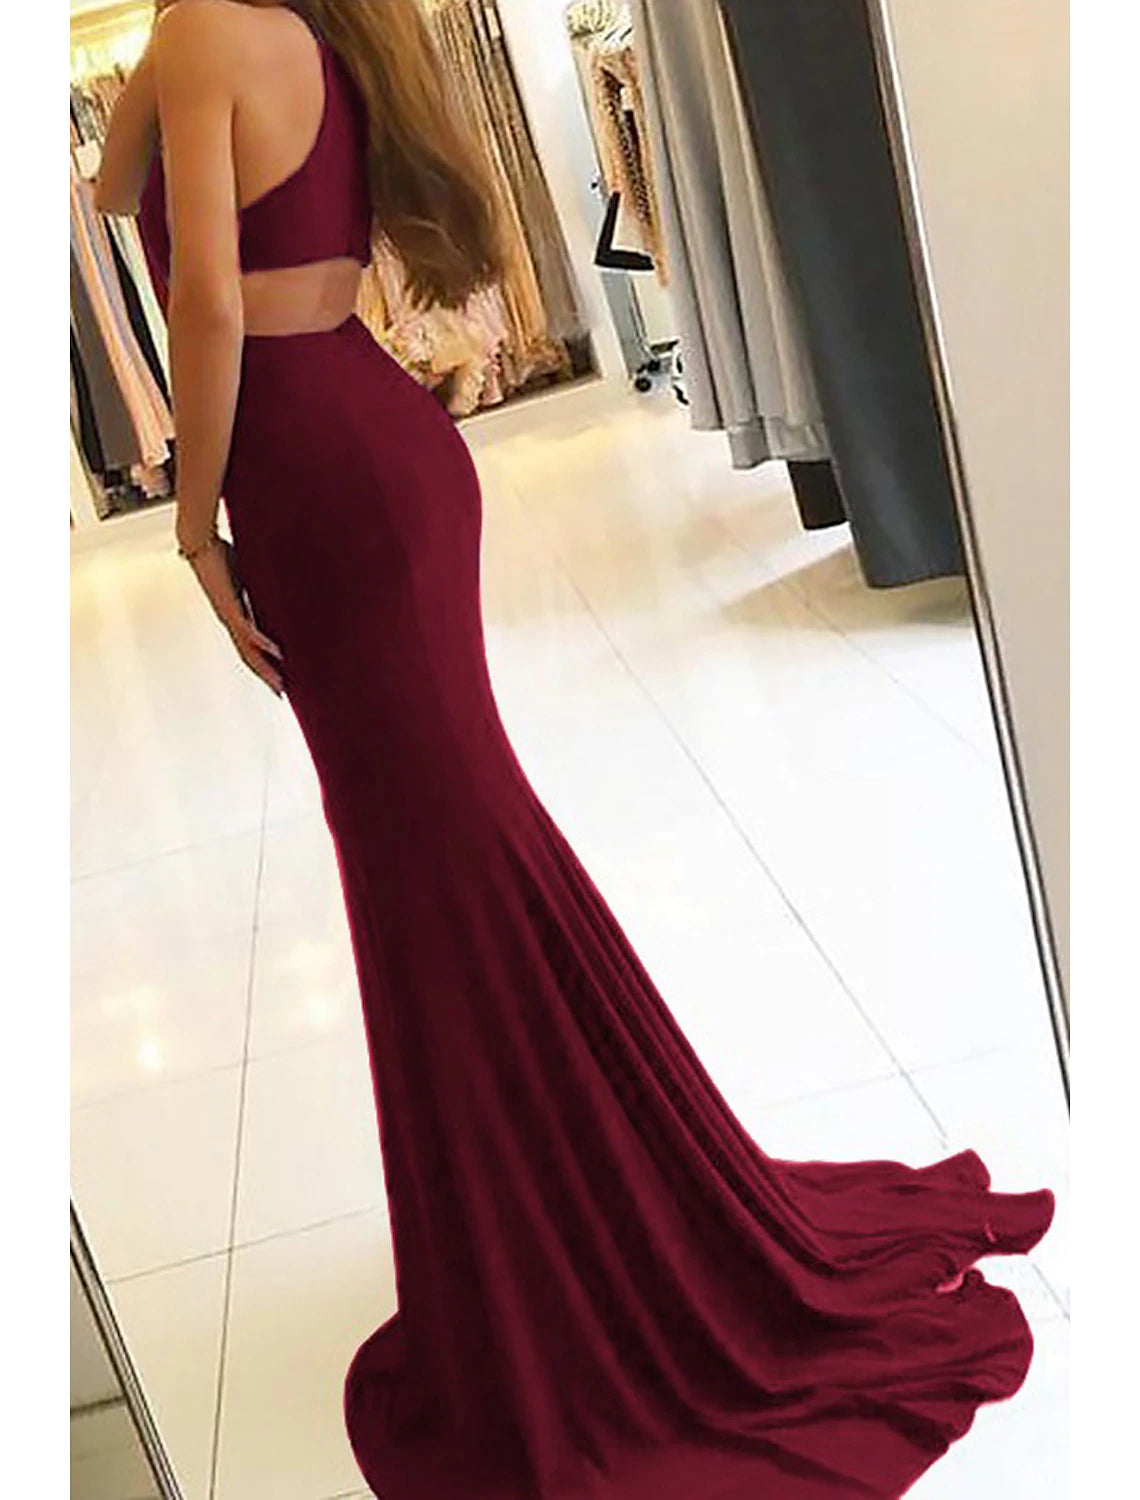 Mermaid / Trumpet Evening Gown Bodycon Dress Formal Prom Court Train Sleeveless High Neck Stretch Fabric